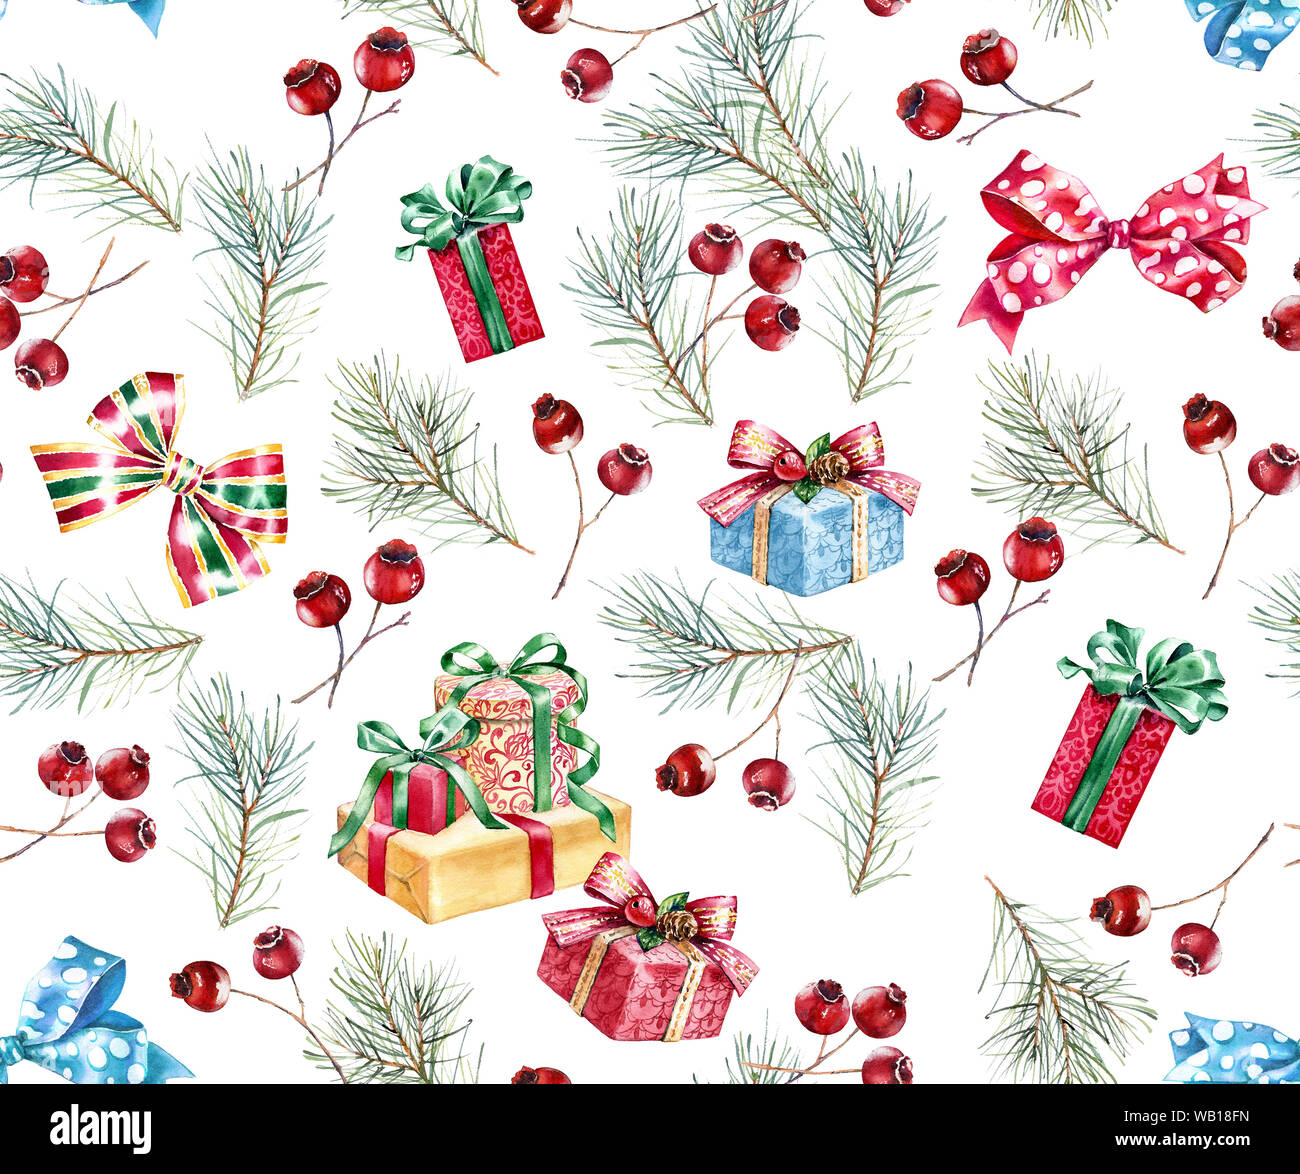 Data Cable Suitable for All Phones Christmas Wreath Seamless Pattern